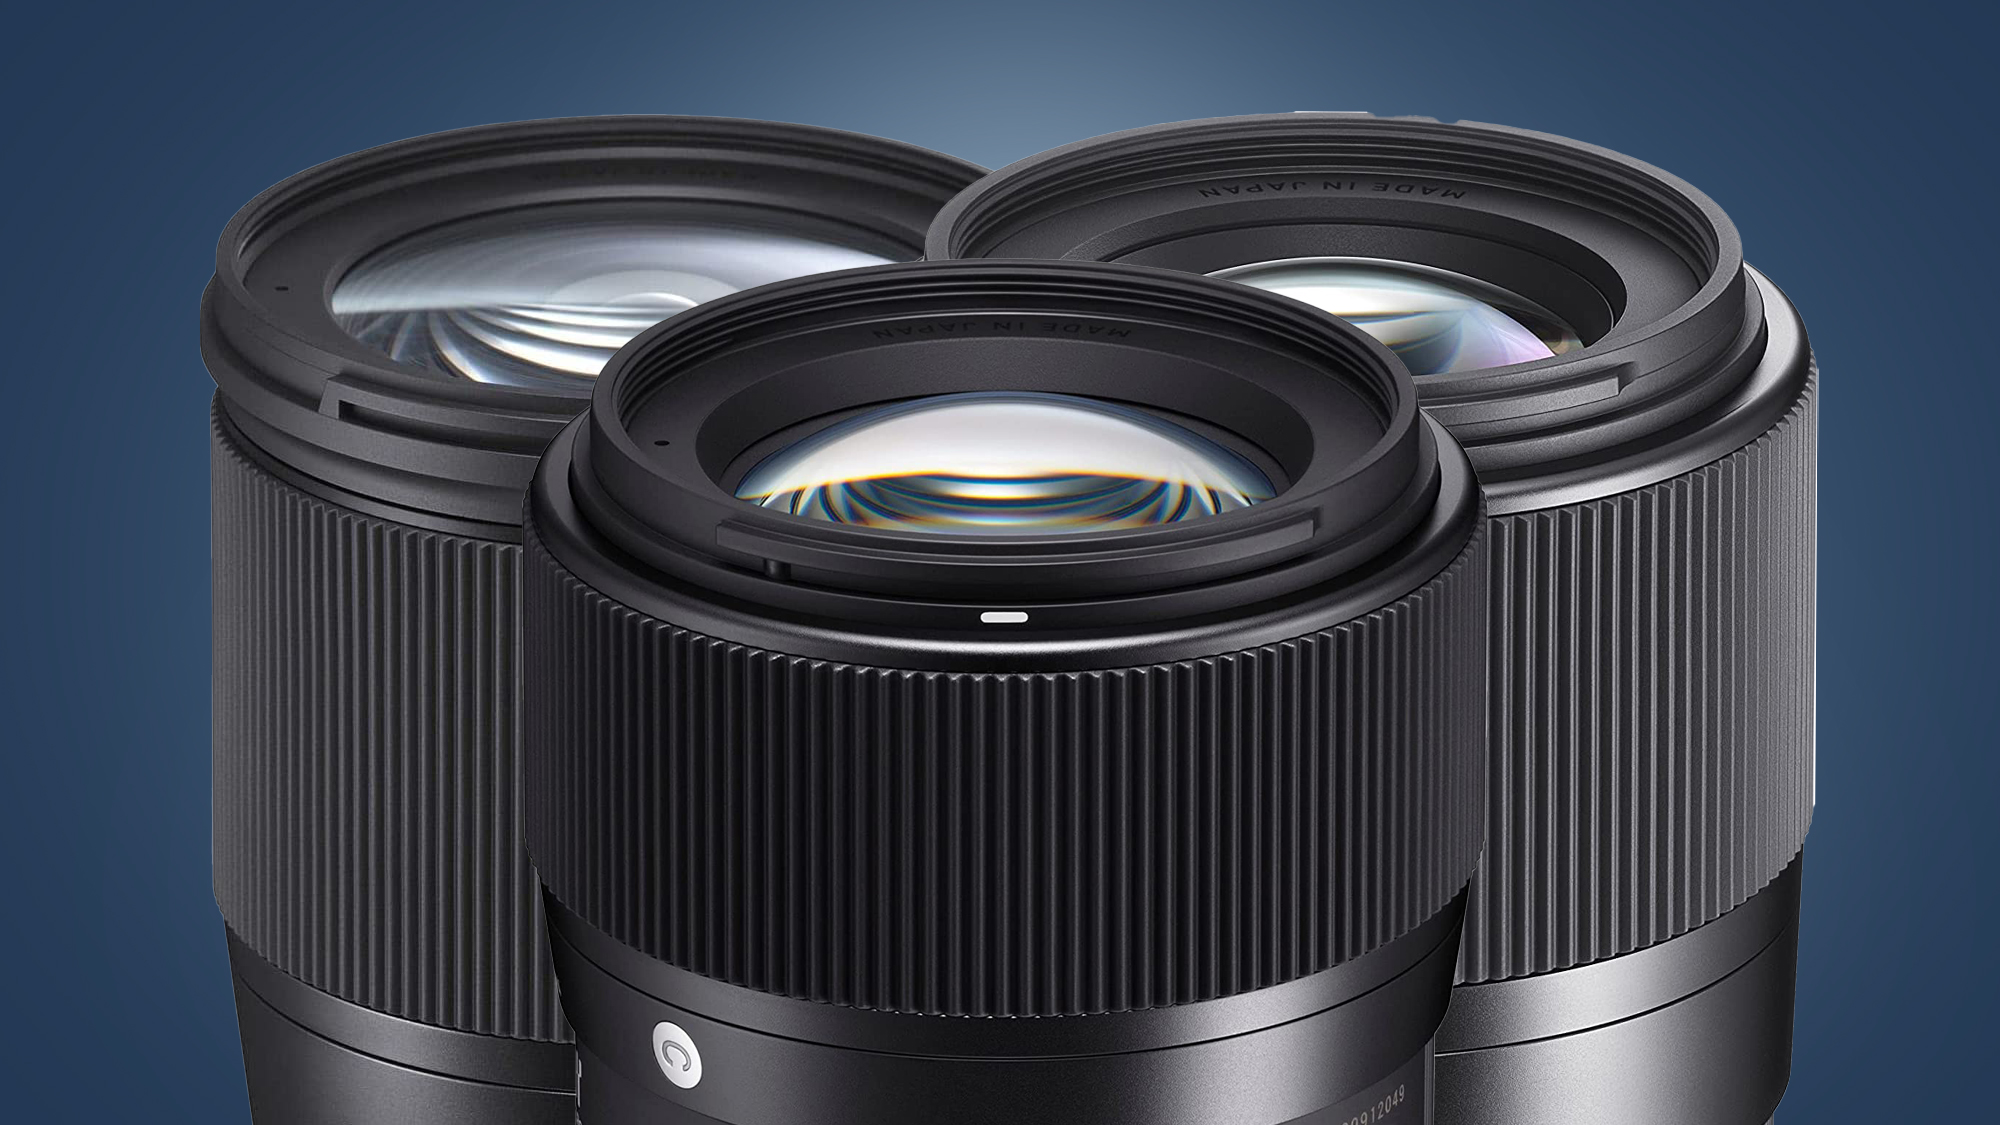 Sigma's new lenses for Fujifilm X-series cameras get likely launch date